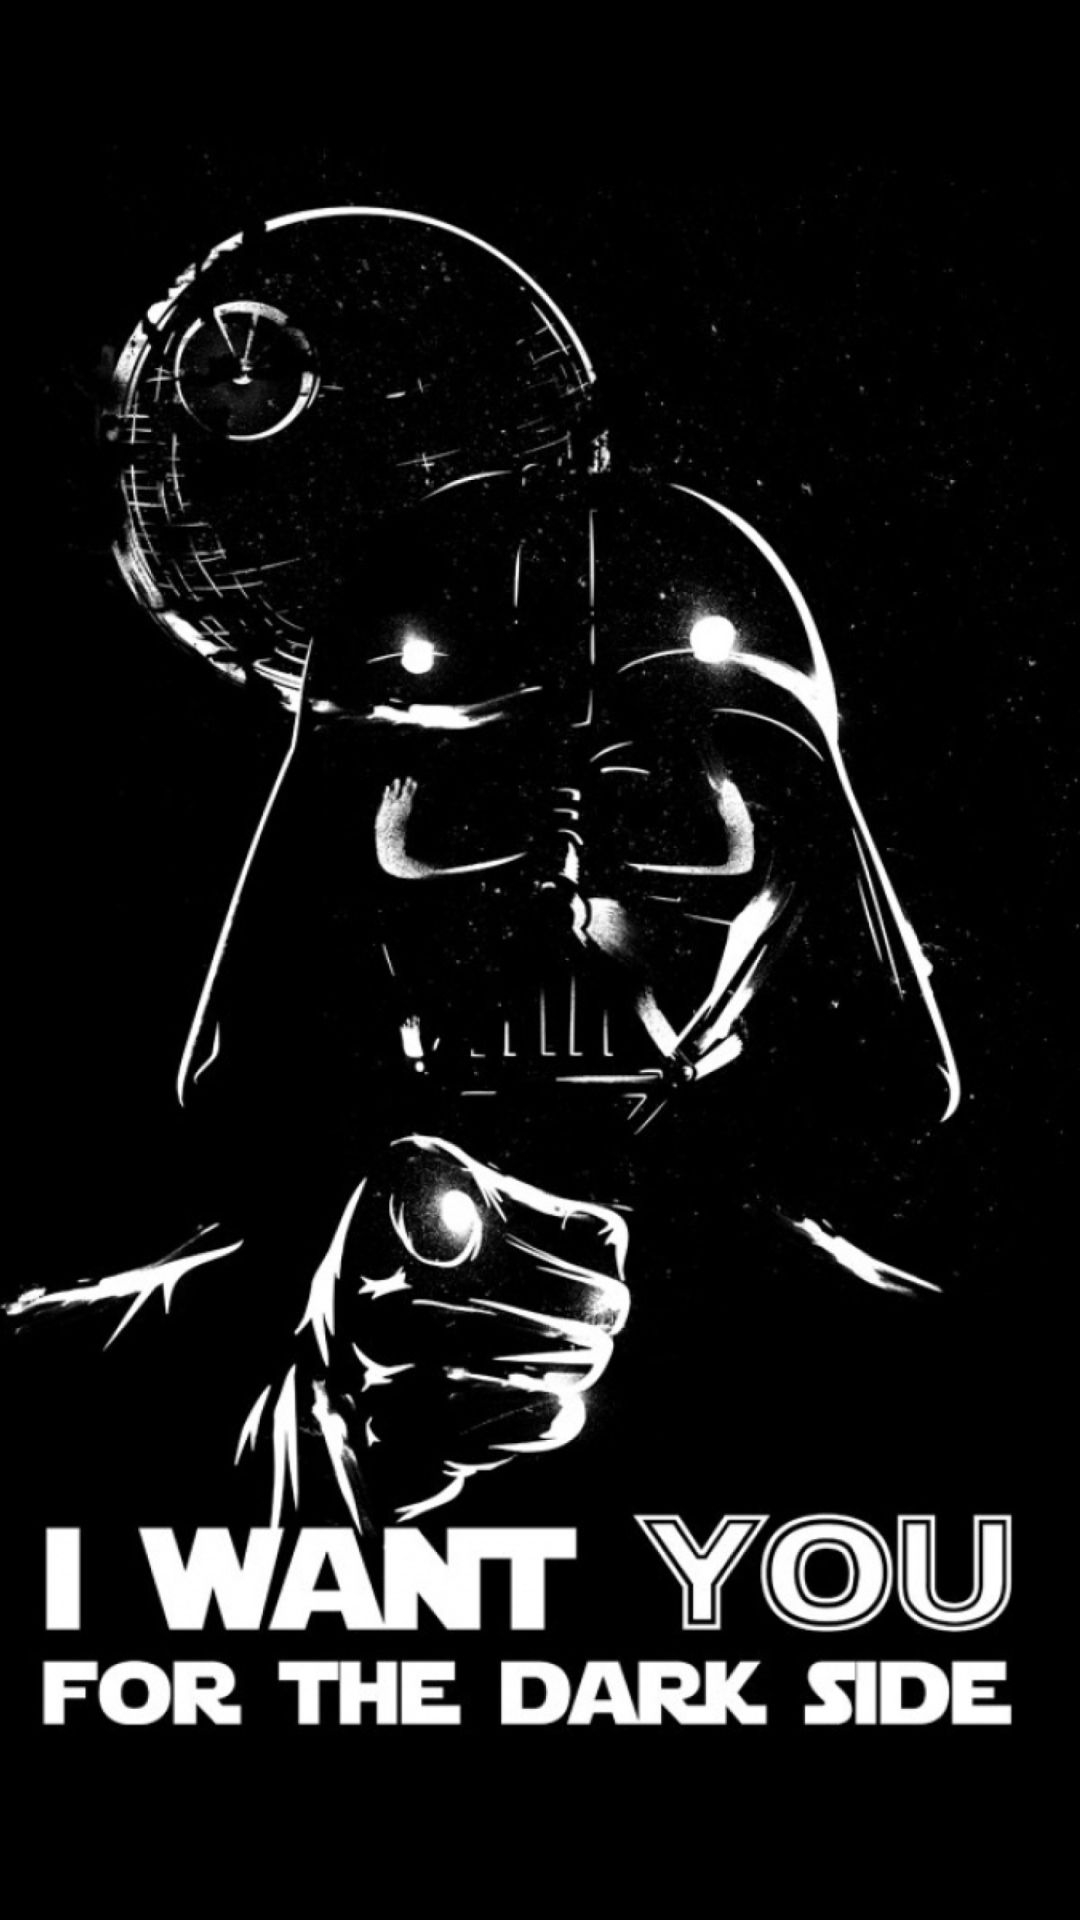 1080x1920 Darth Vader Dark Side Tap to see more exciting Star Wars wallpaper! @mobile9 | Dark side star wars, Vader star wars, Star wars wallpaper